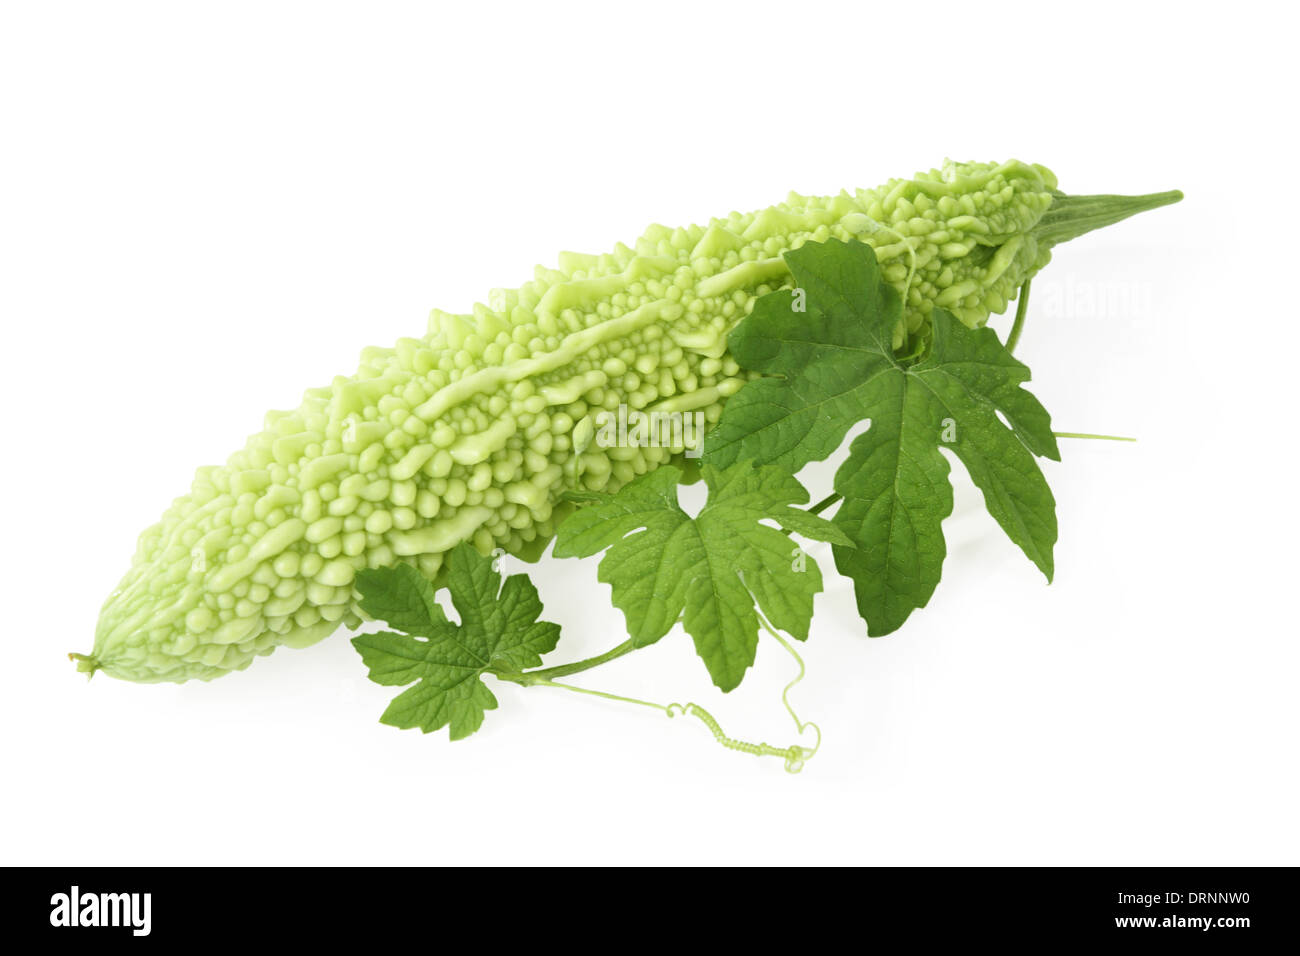 balsam pear and leaf Stock Photo